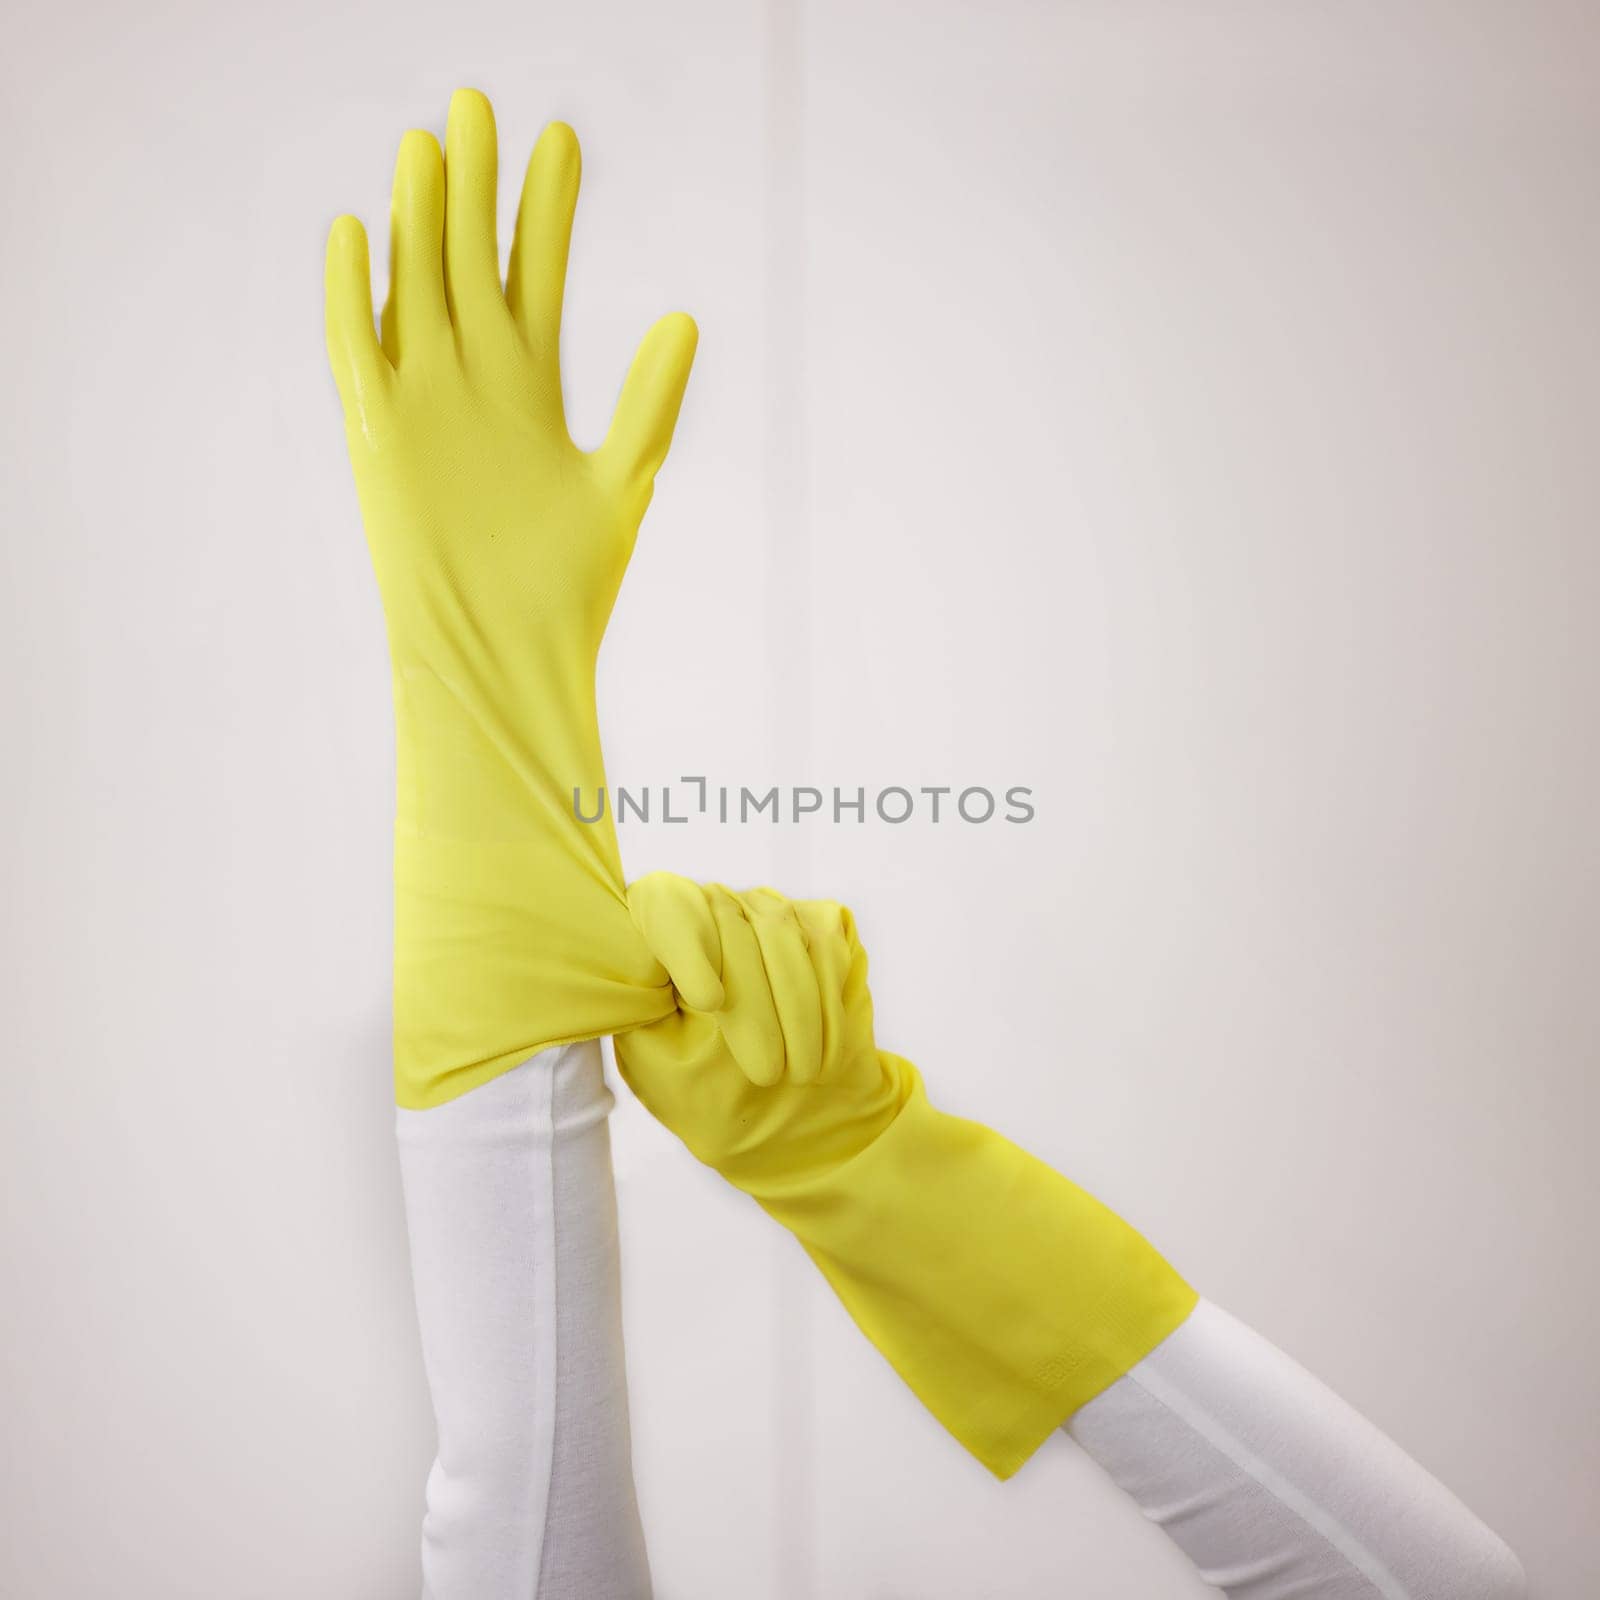 Cleaner, hands and gloves with cleaning and hygiene, safety from bacteria and germs with household disinfection. Protection, sanitize and ready to clean, person with housekeeping and maintenance by YuriArcurs